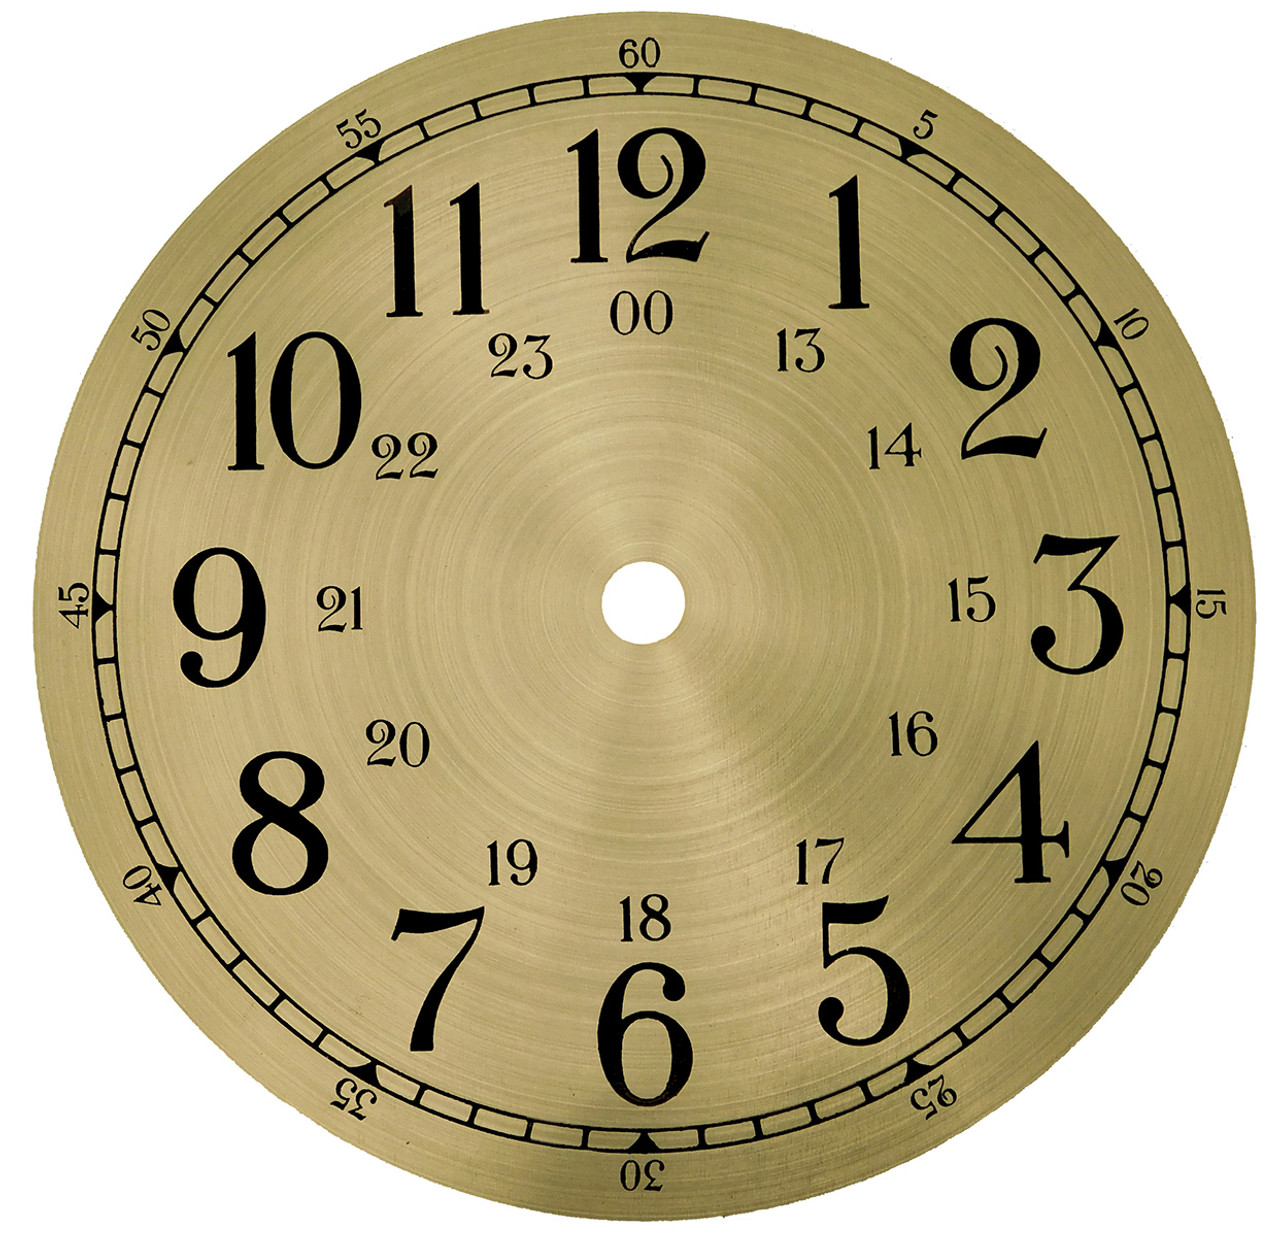 DIAL METAL BRASS FINISHED 6 1/2" ROUND WITH 24 HOUR RING